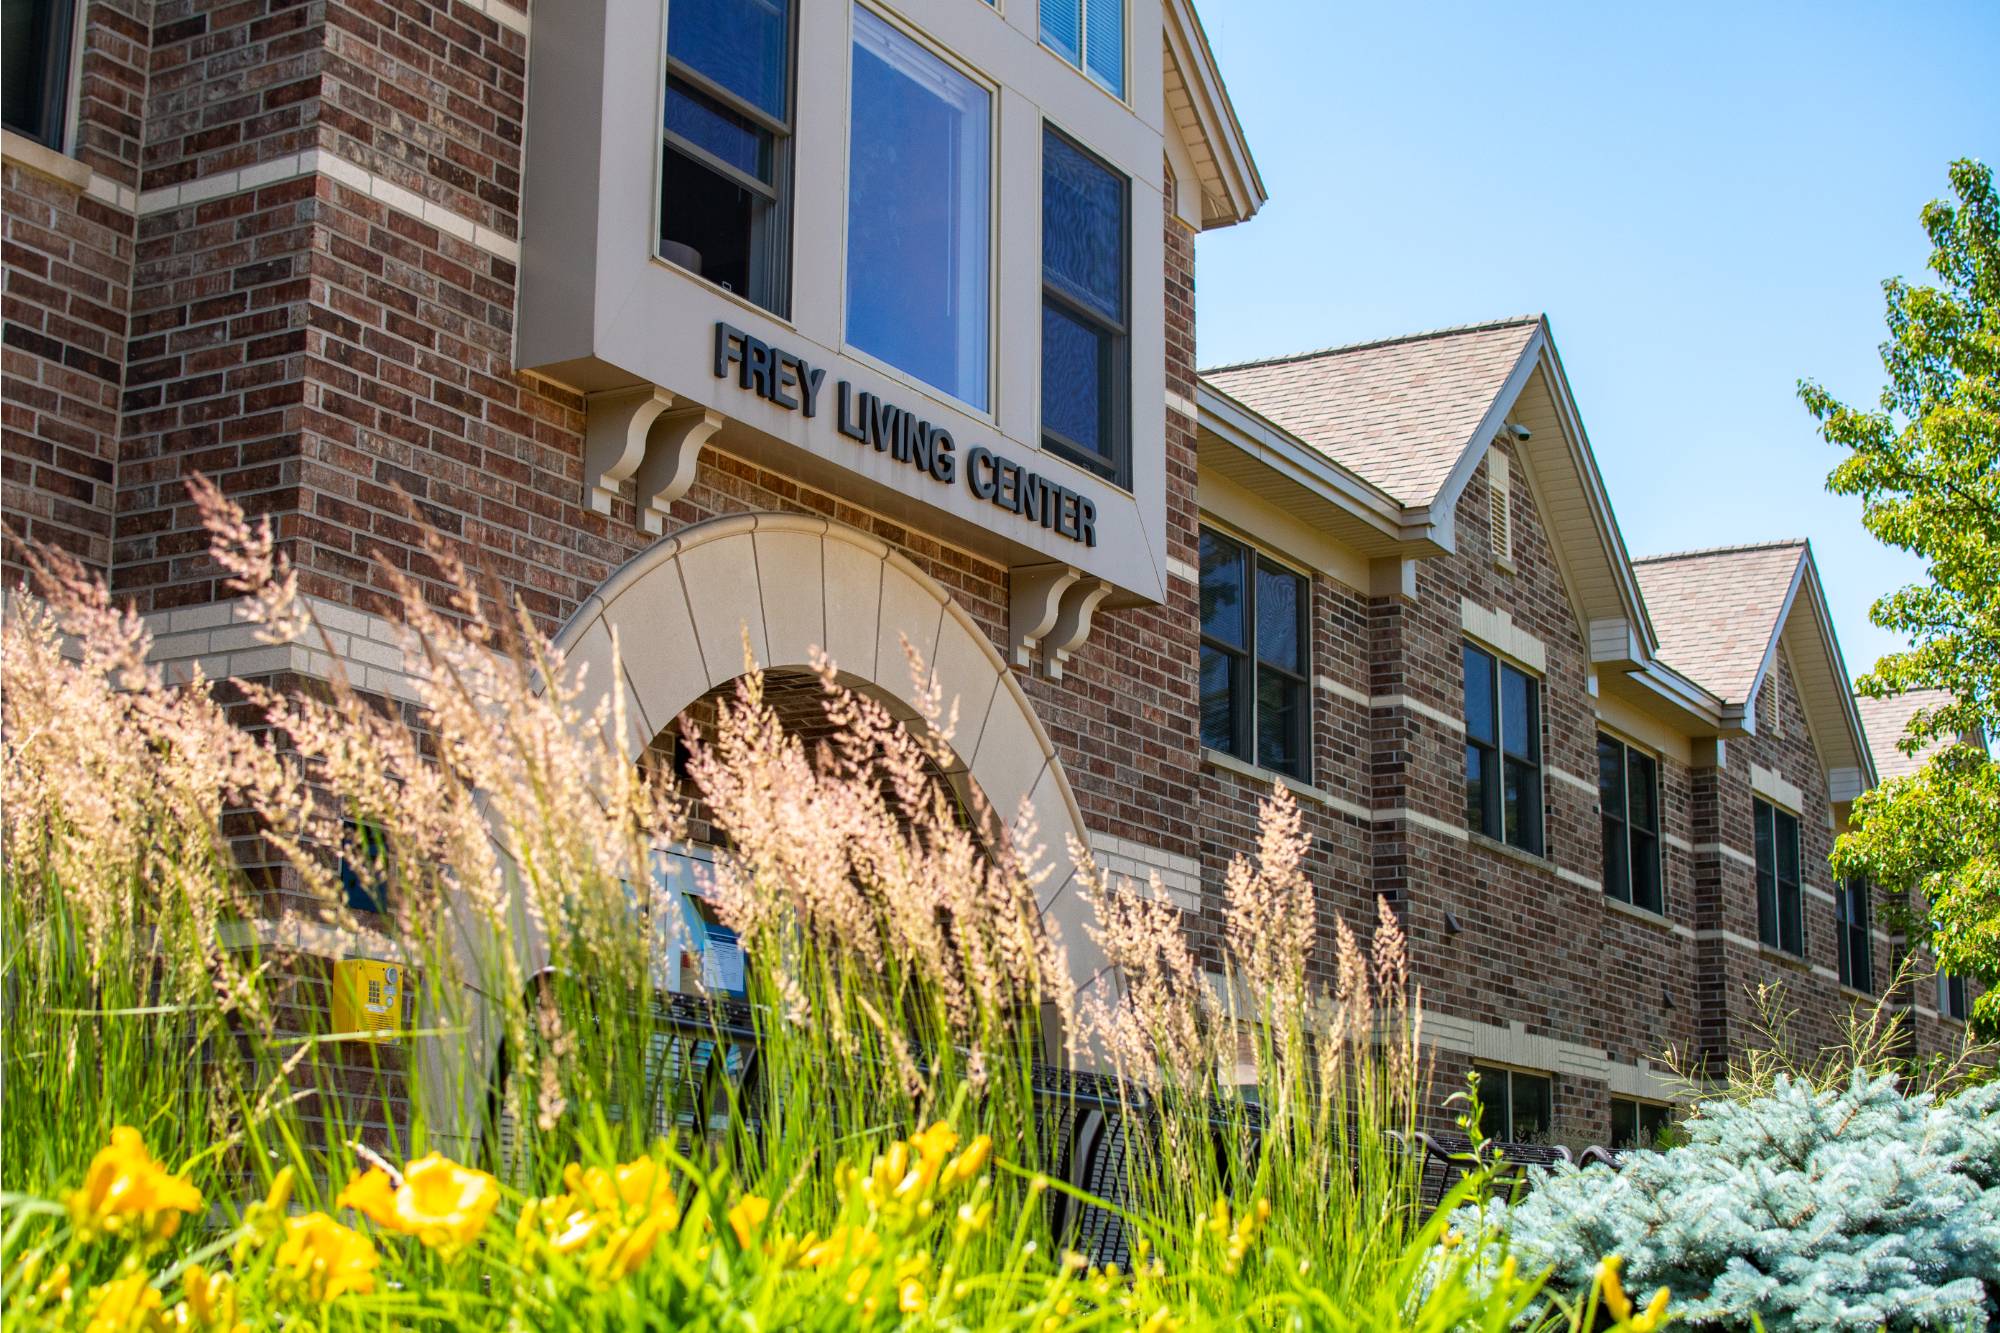 Frey Living Center is a one-bedroom apartment-style housing option on Grand Valley's Allendale campus.